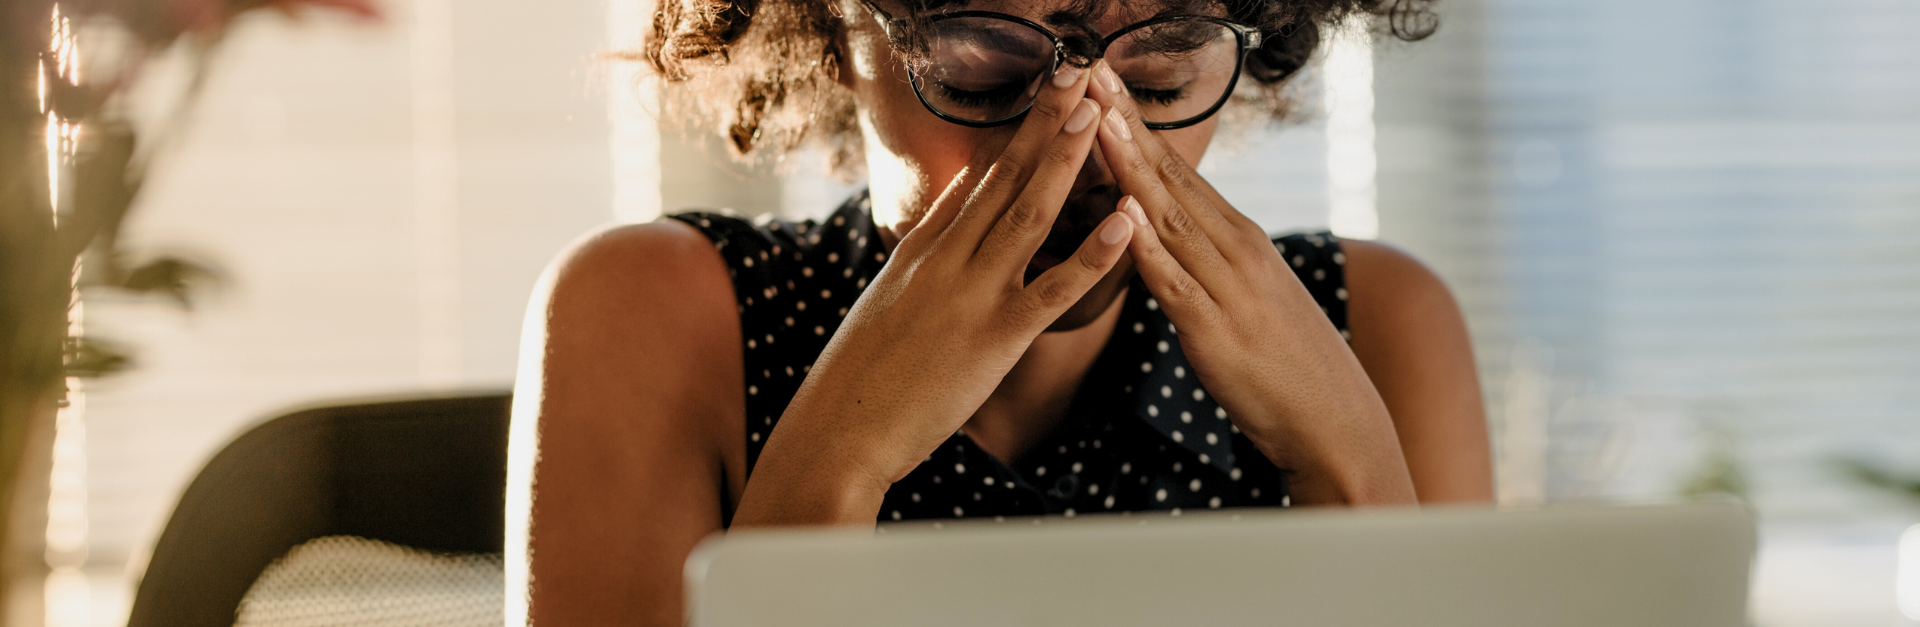 Why Are Women More Likely To Experience Burnout?